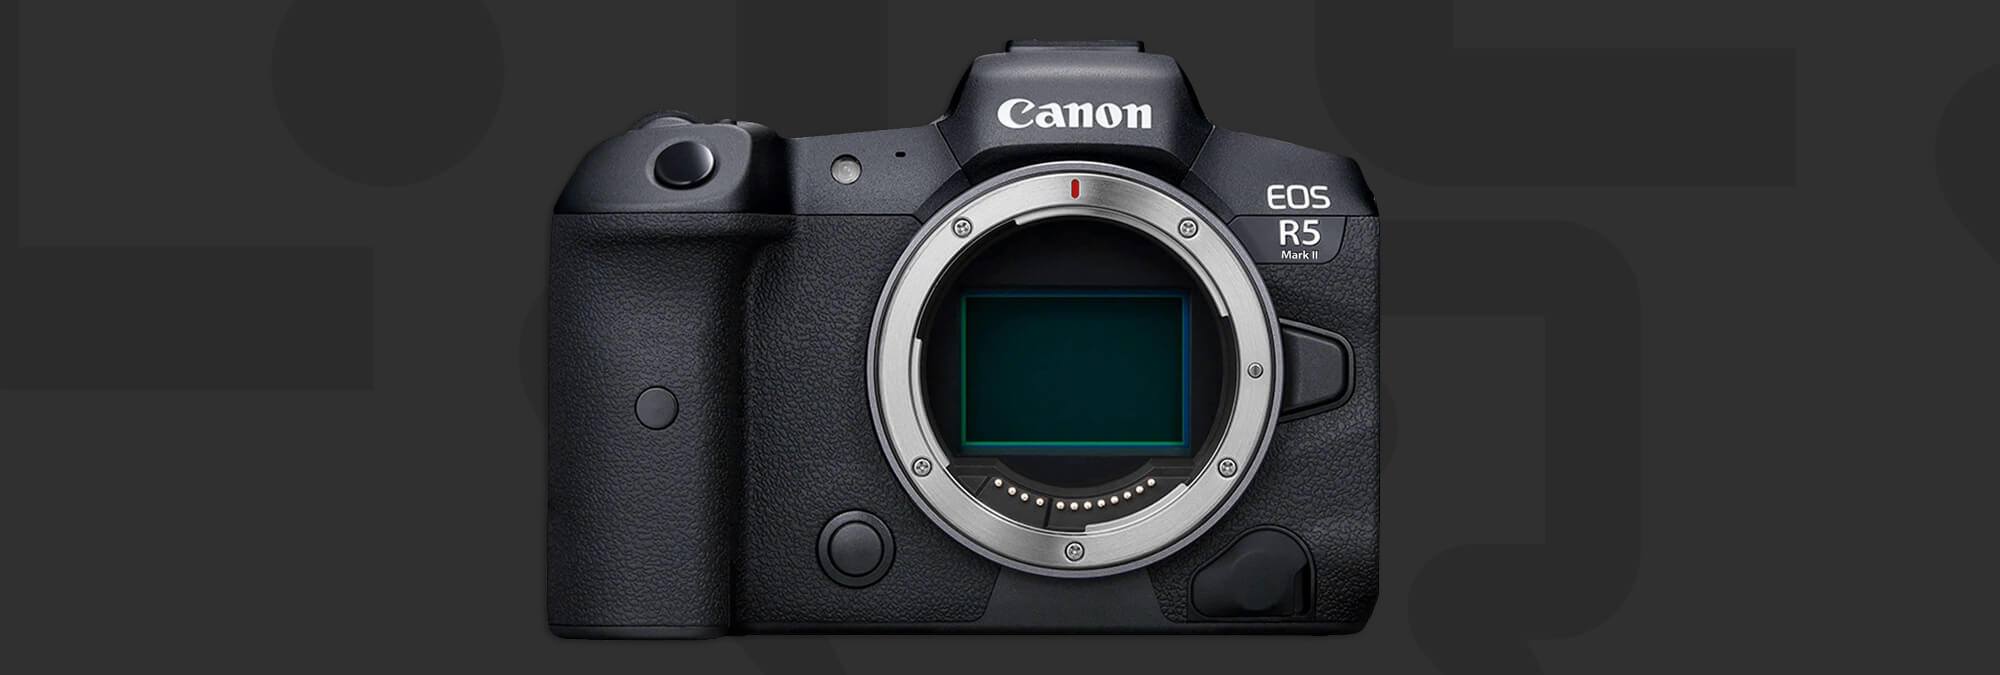 Canon EOS R5 Mark II sensor resolution likely to stick at 45mp but